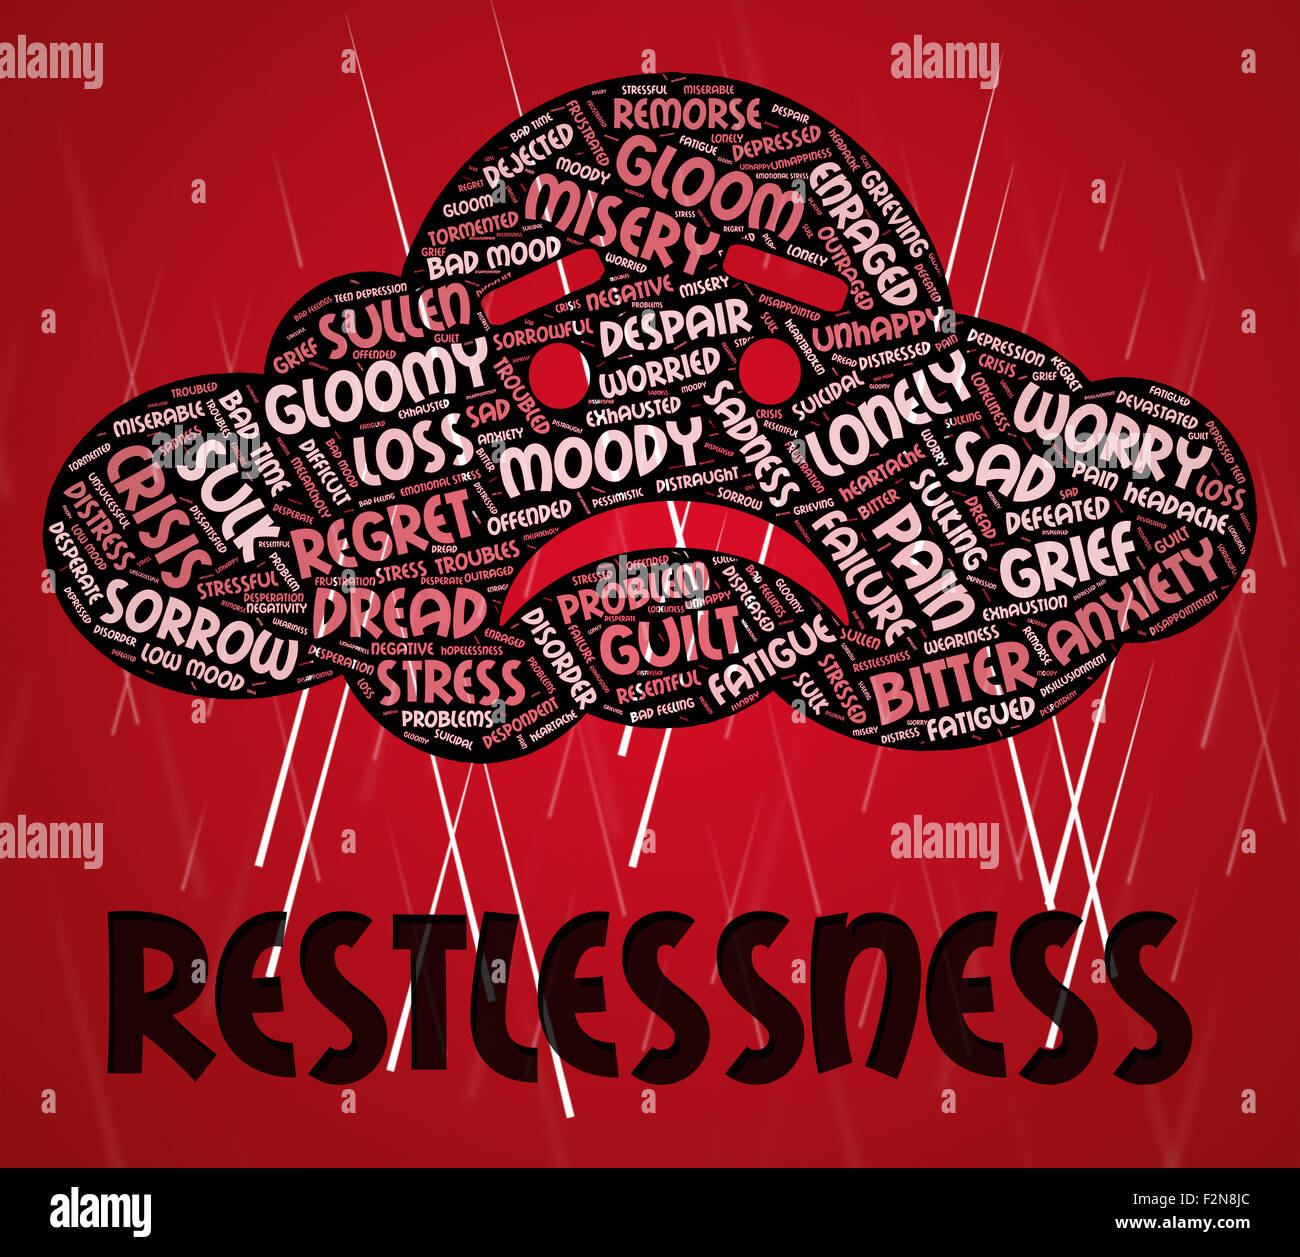 Restlessness Word Meaning Ill At Ease And Worked Up Stock Photo